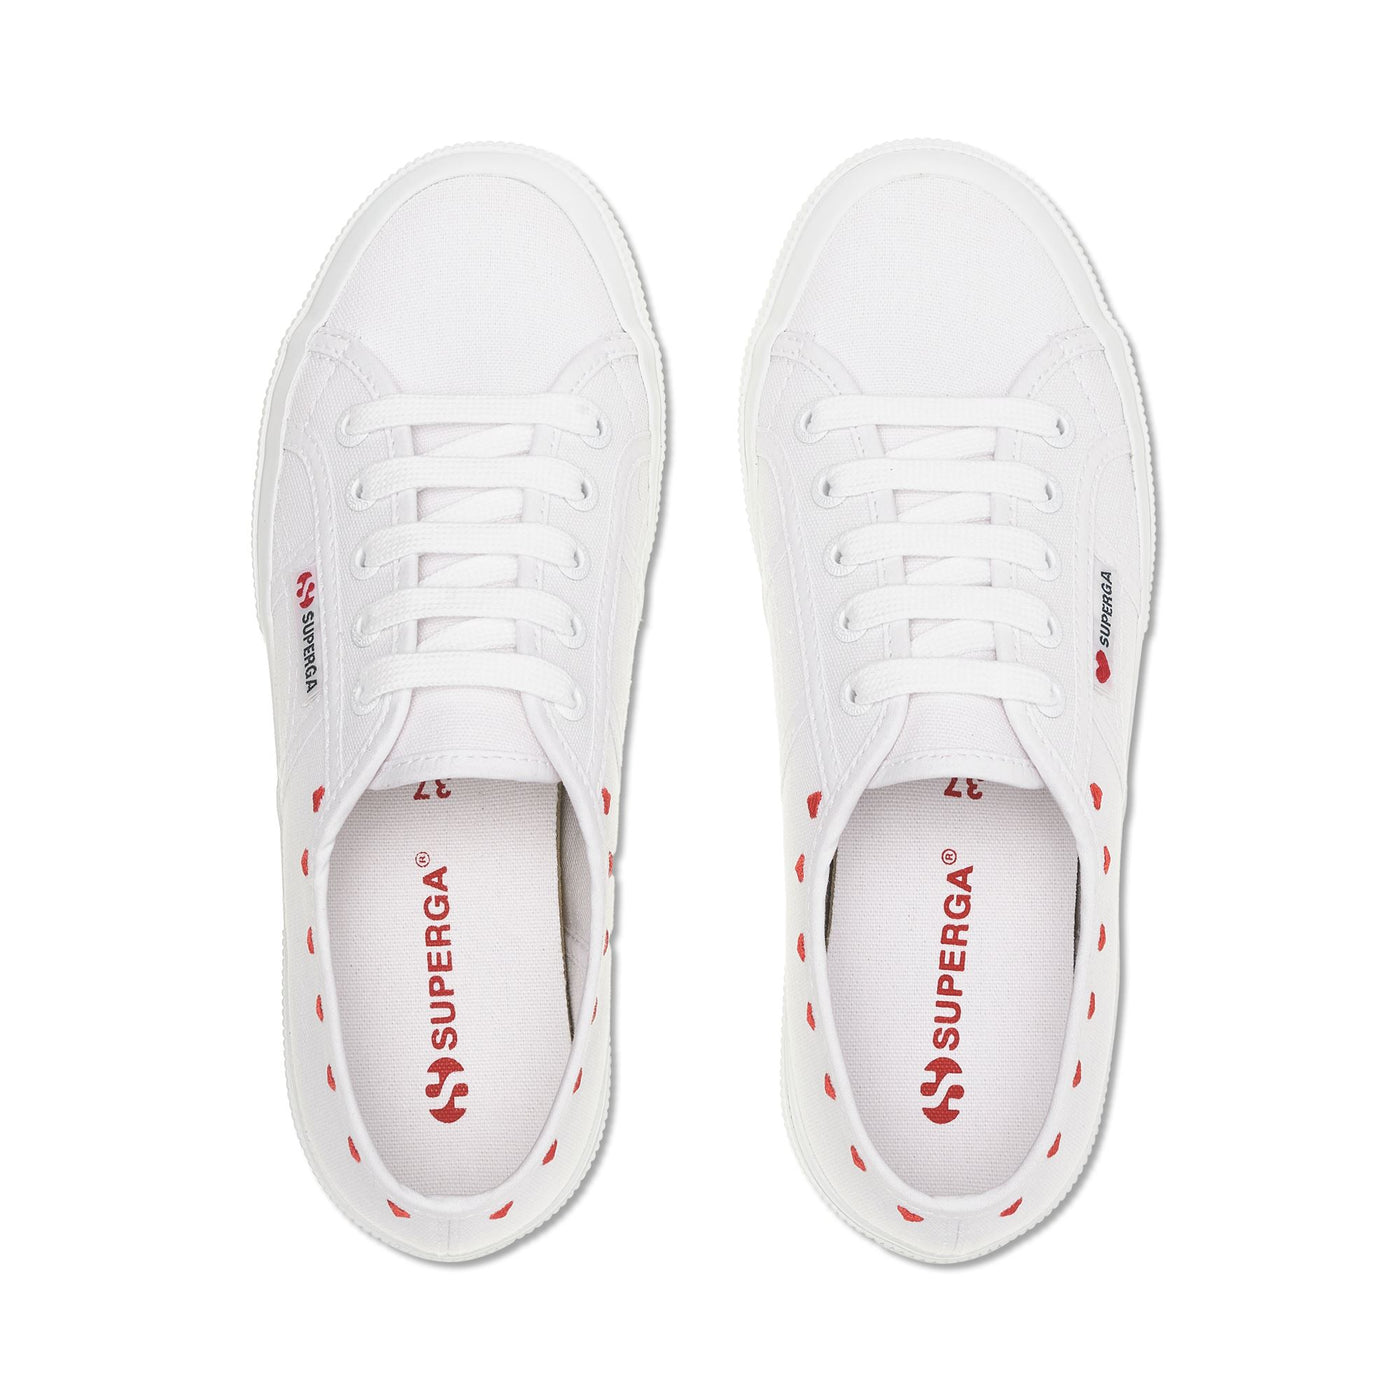 Le Superga Woman 2750 LITTLE HEARTS EMBROIDERY Low Cut WHITE-RED HEART Dressed Back (jpg Rgb)		